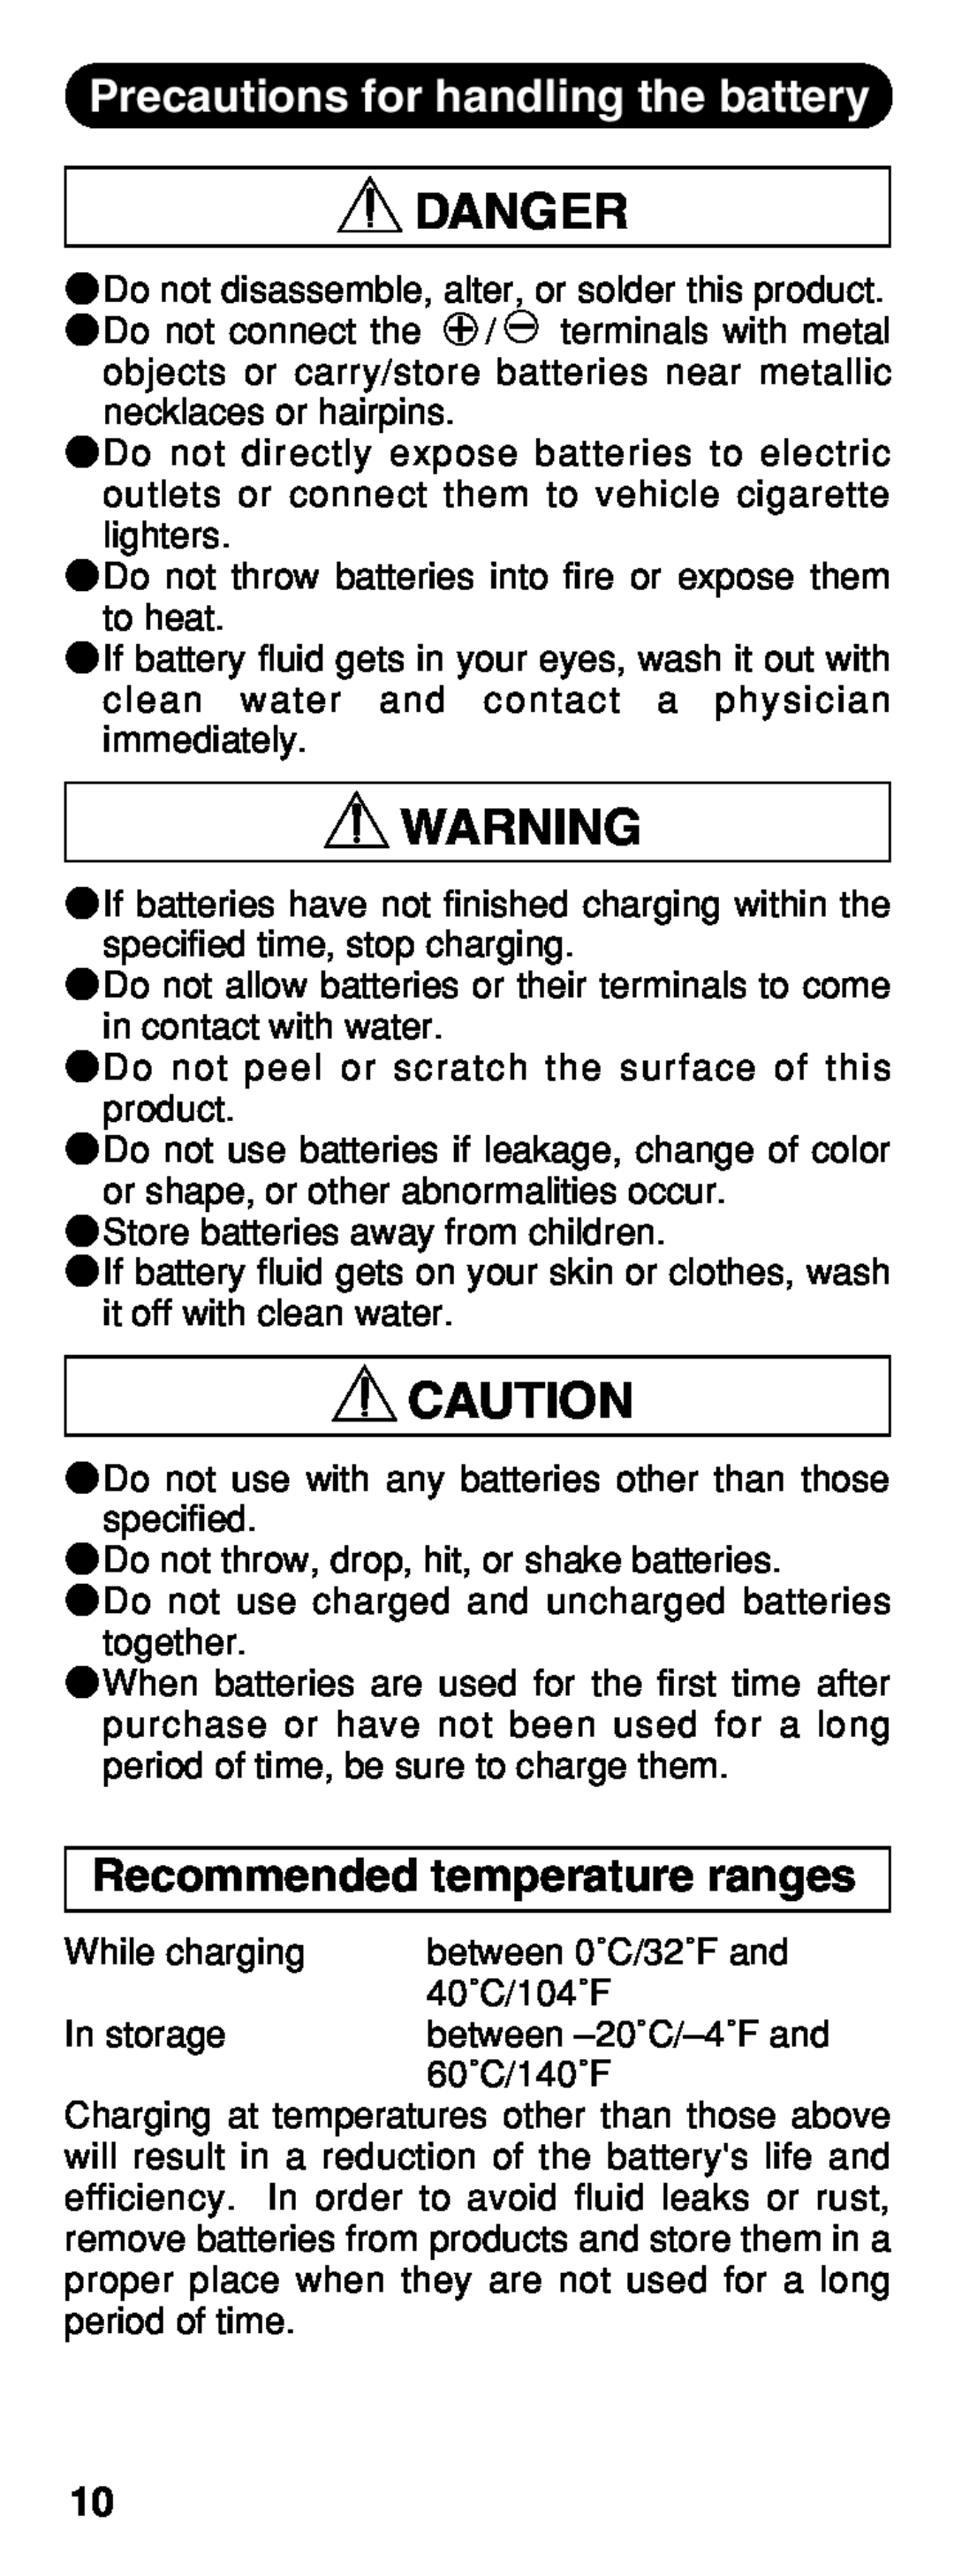 Olympus B-20 LPC instruction manual Danger, Precautions for handling the battery, Recommended temperature ranges 